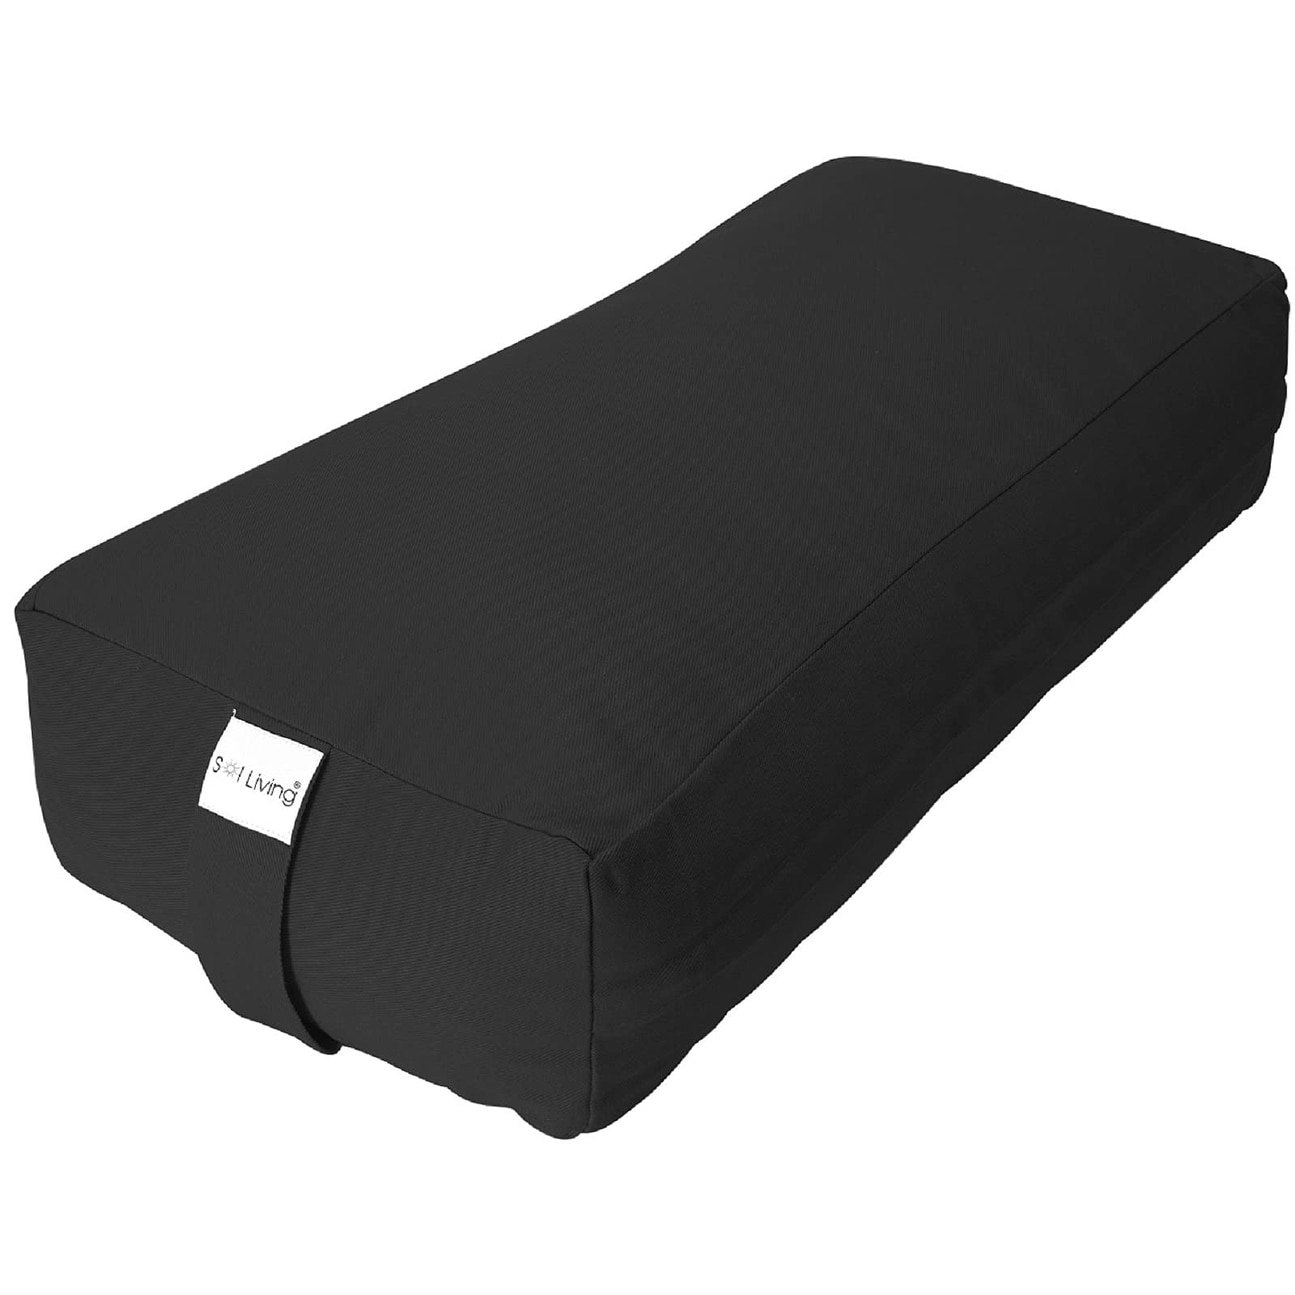 https://ak1.ostkcdn.com/images/products/is/images/direct/9c361697d646d3b7b5b43efff6f8e304eb2f3f9c/Sol-Living-Rectangular-Yoga-Bolster-Meditation-Cushion---Cotton.jpg